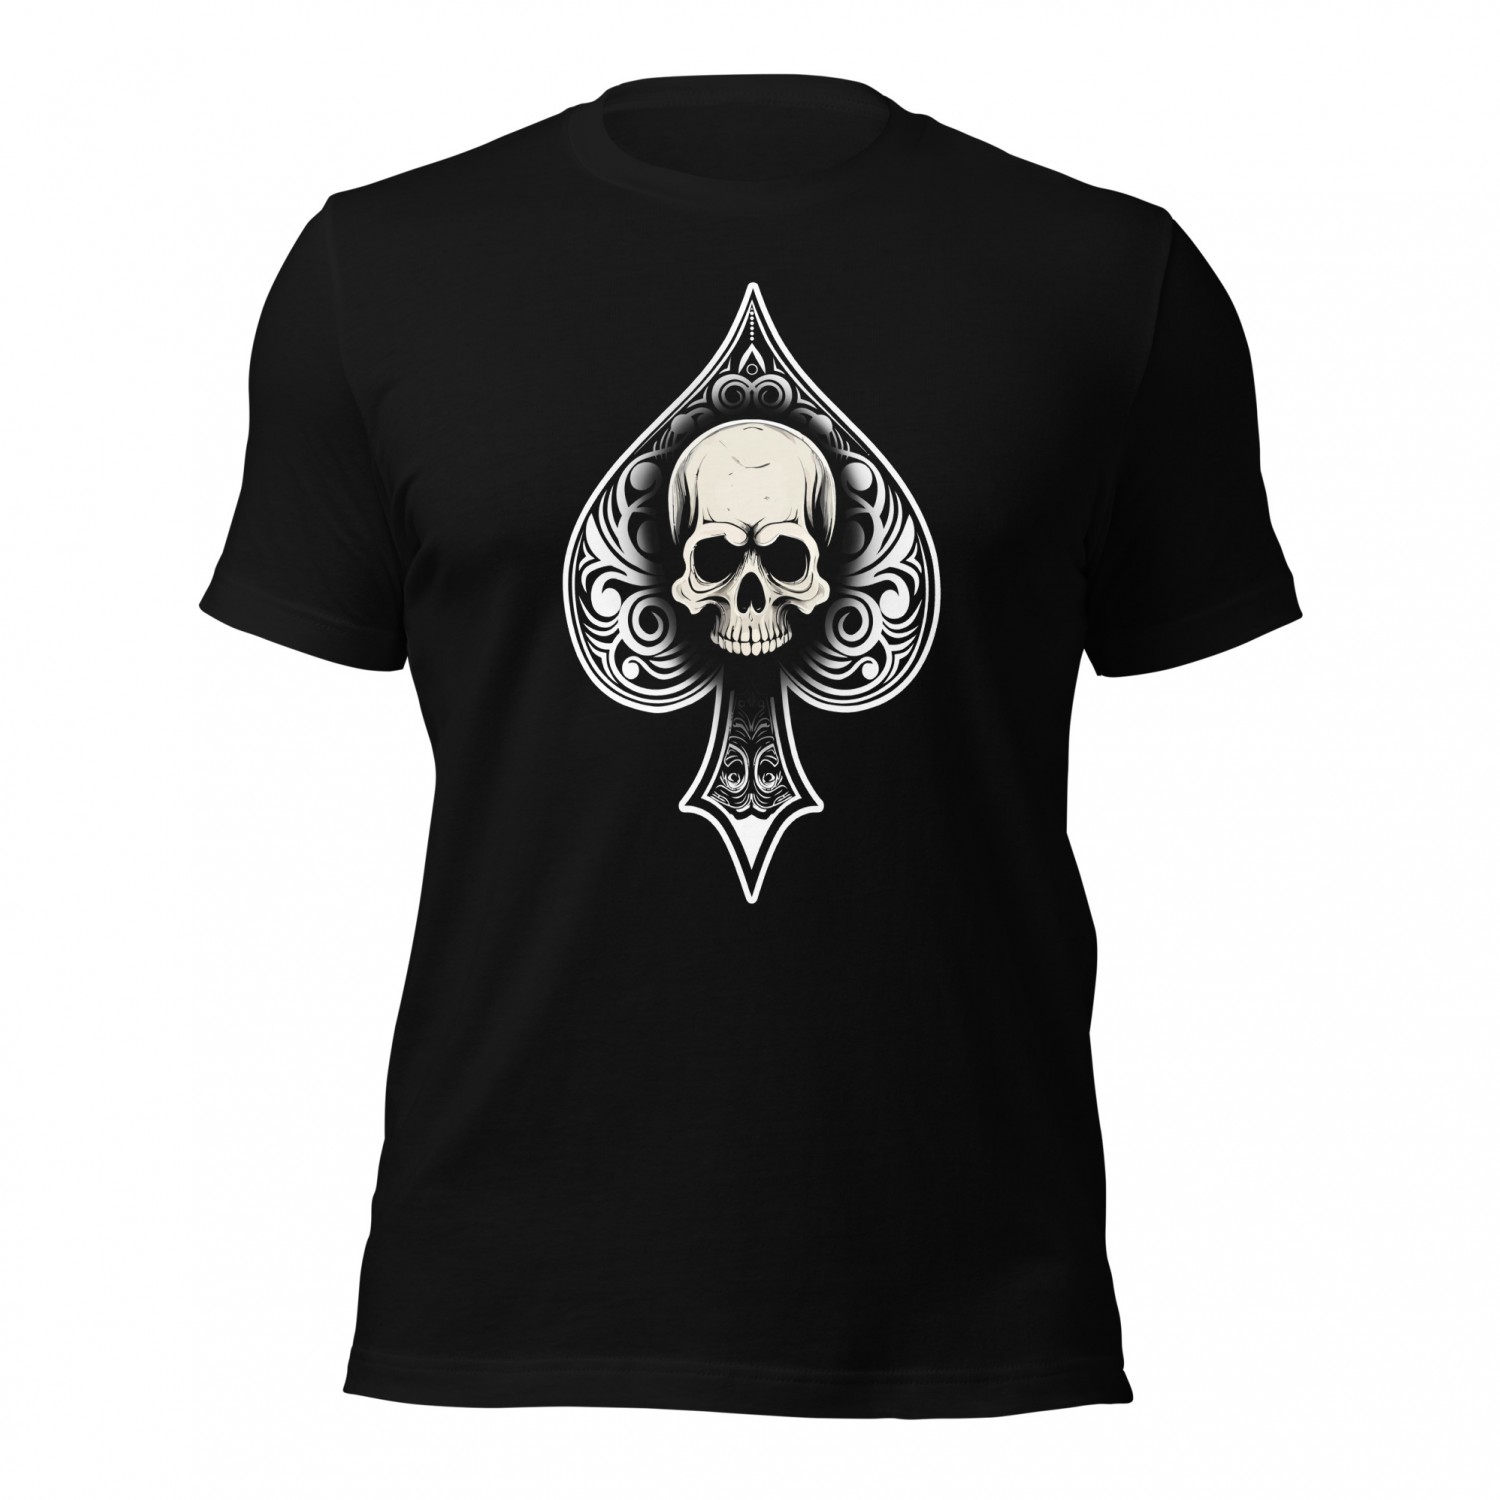 T-shirt with the Spades card